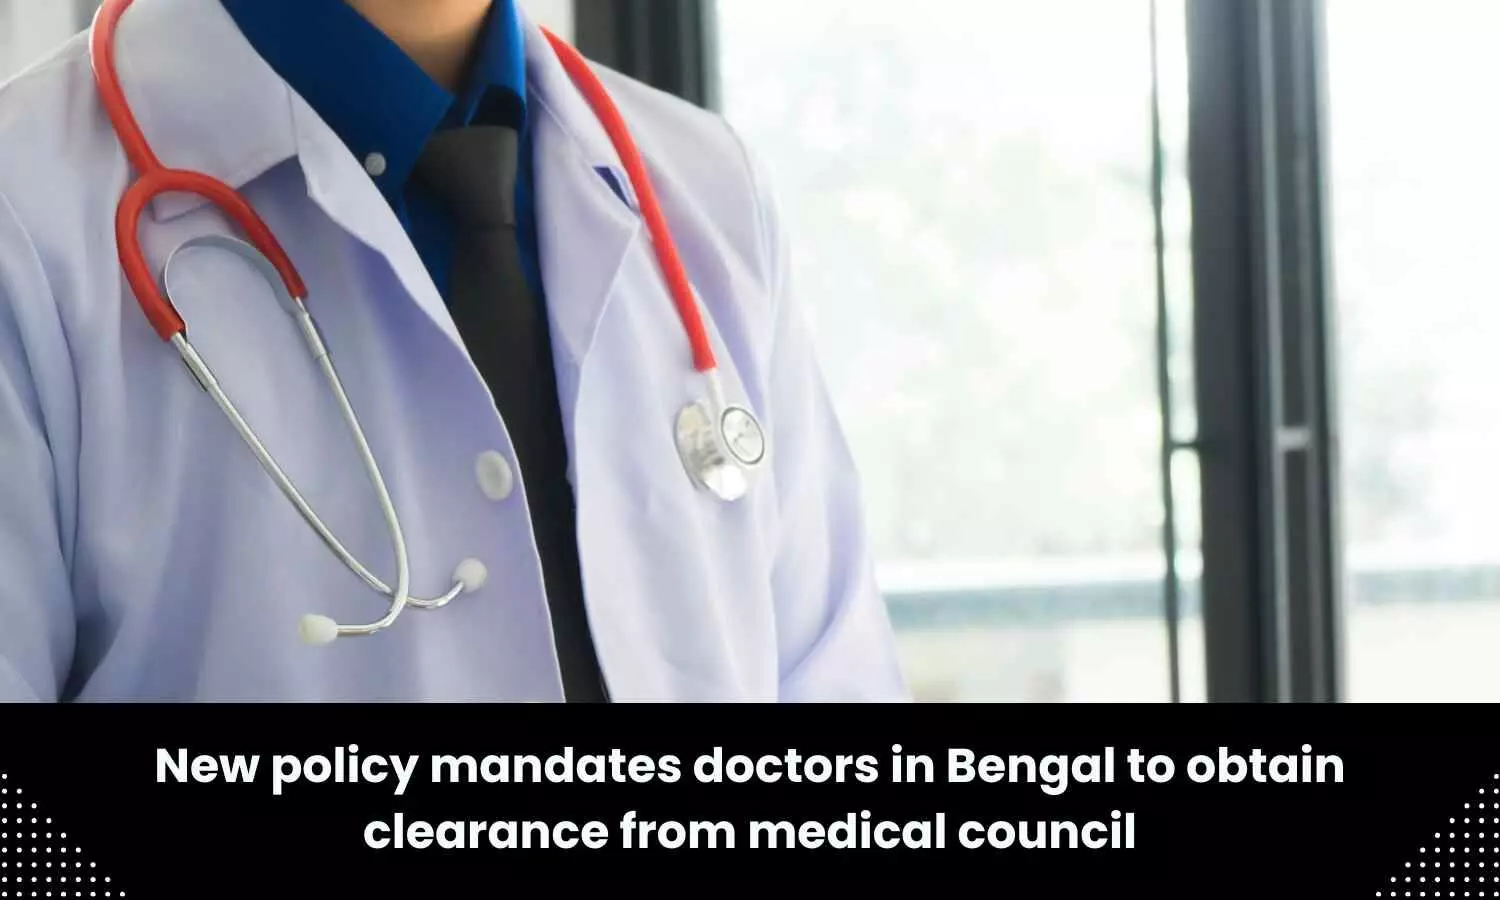 West Bengal: Doctors practicing in State required to obtain State Medical Council clearance in upcoming policy